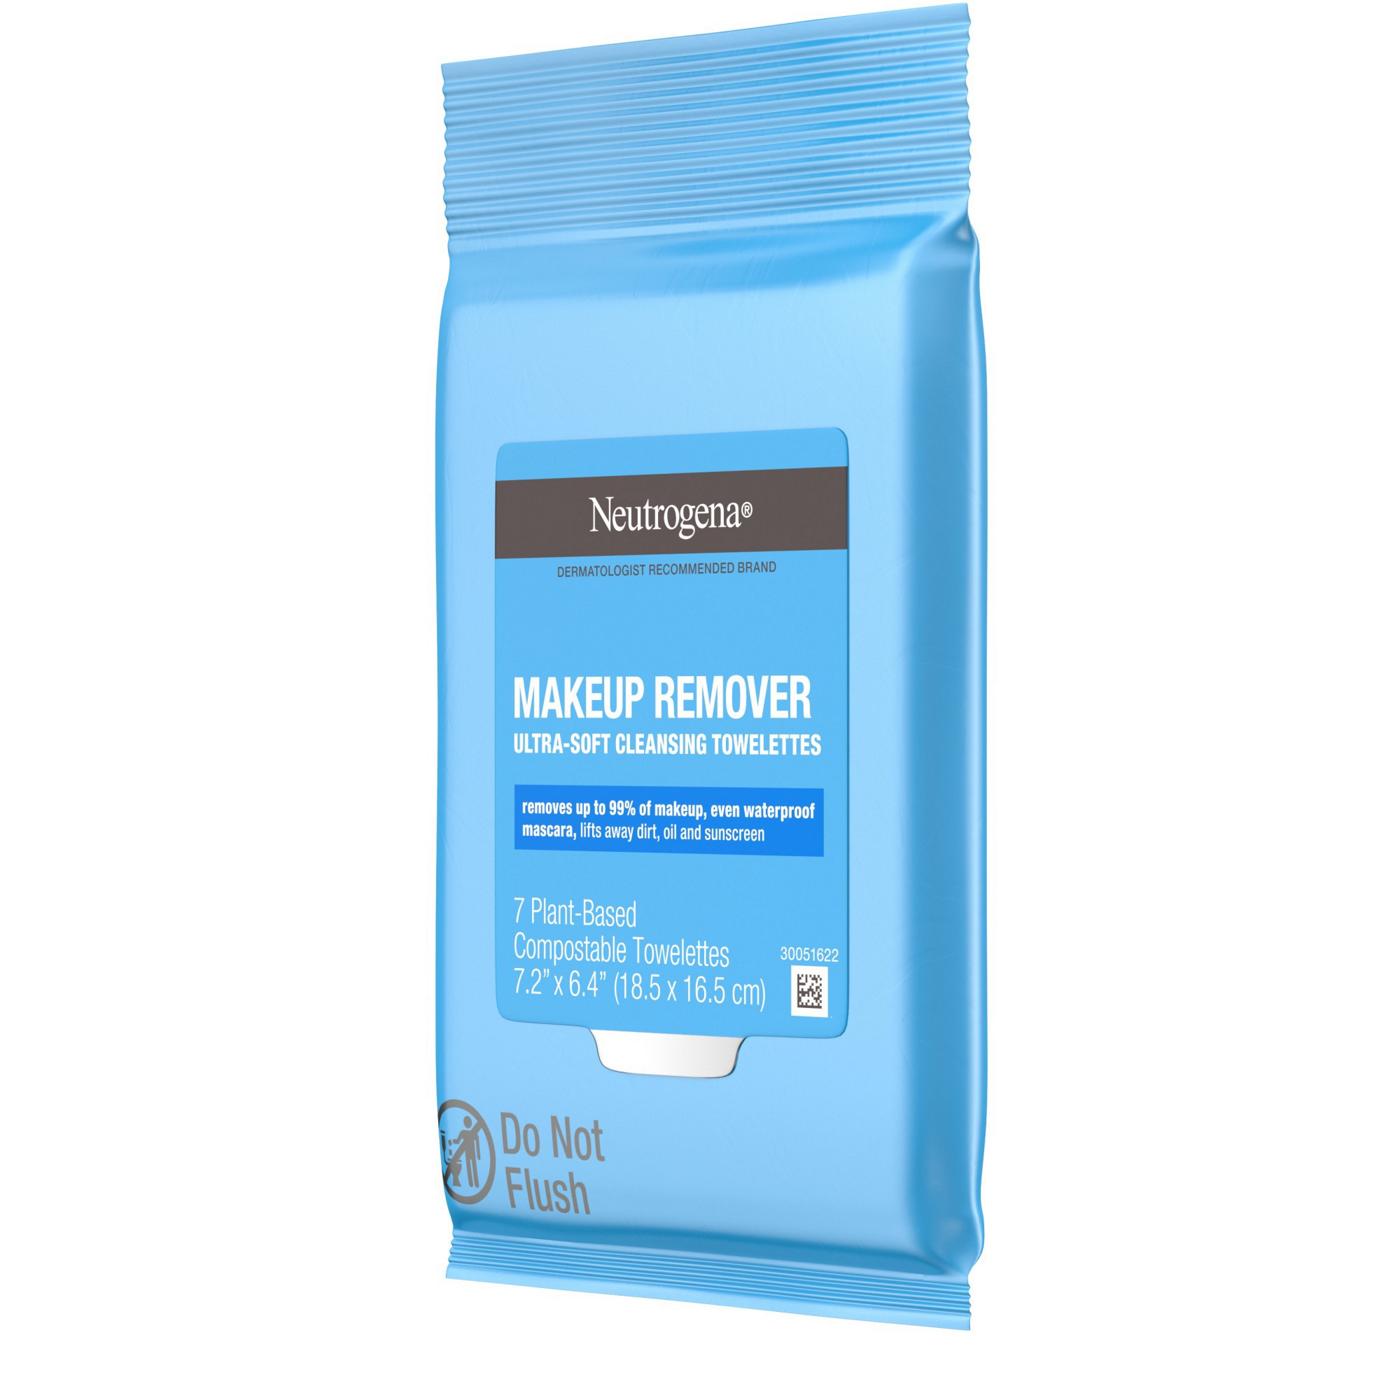 Neutrogena Makeup Remover Cleansing Towelettes; image 3 of 4